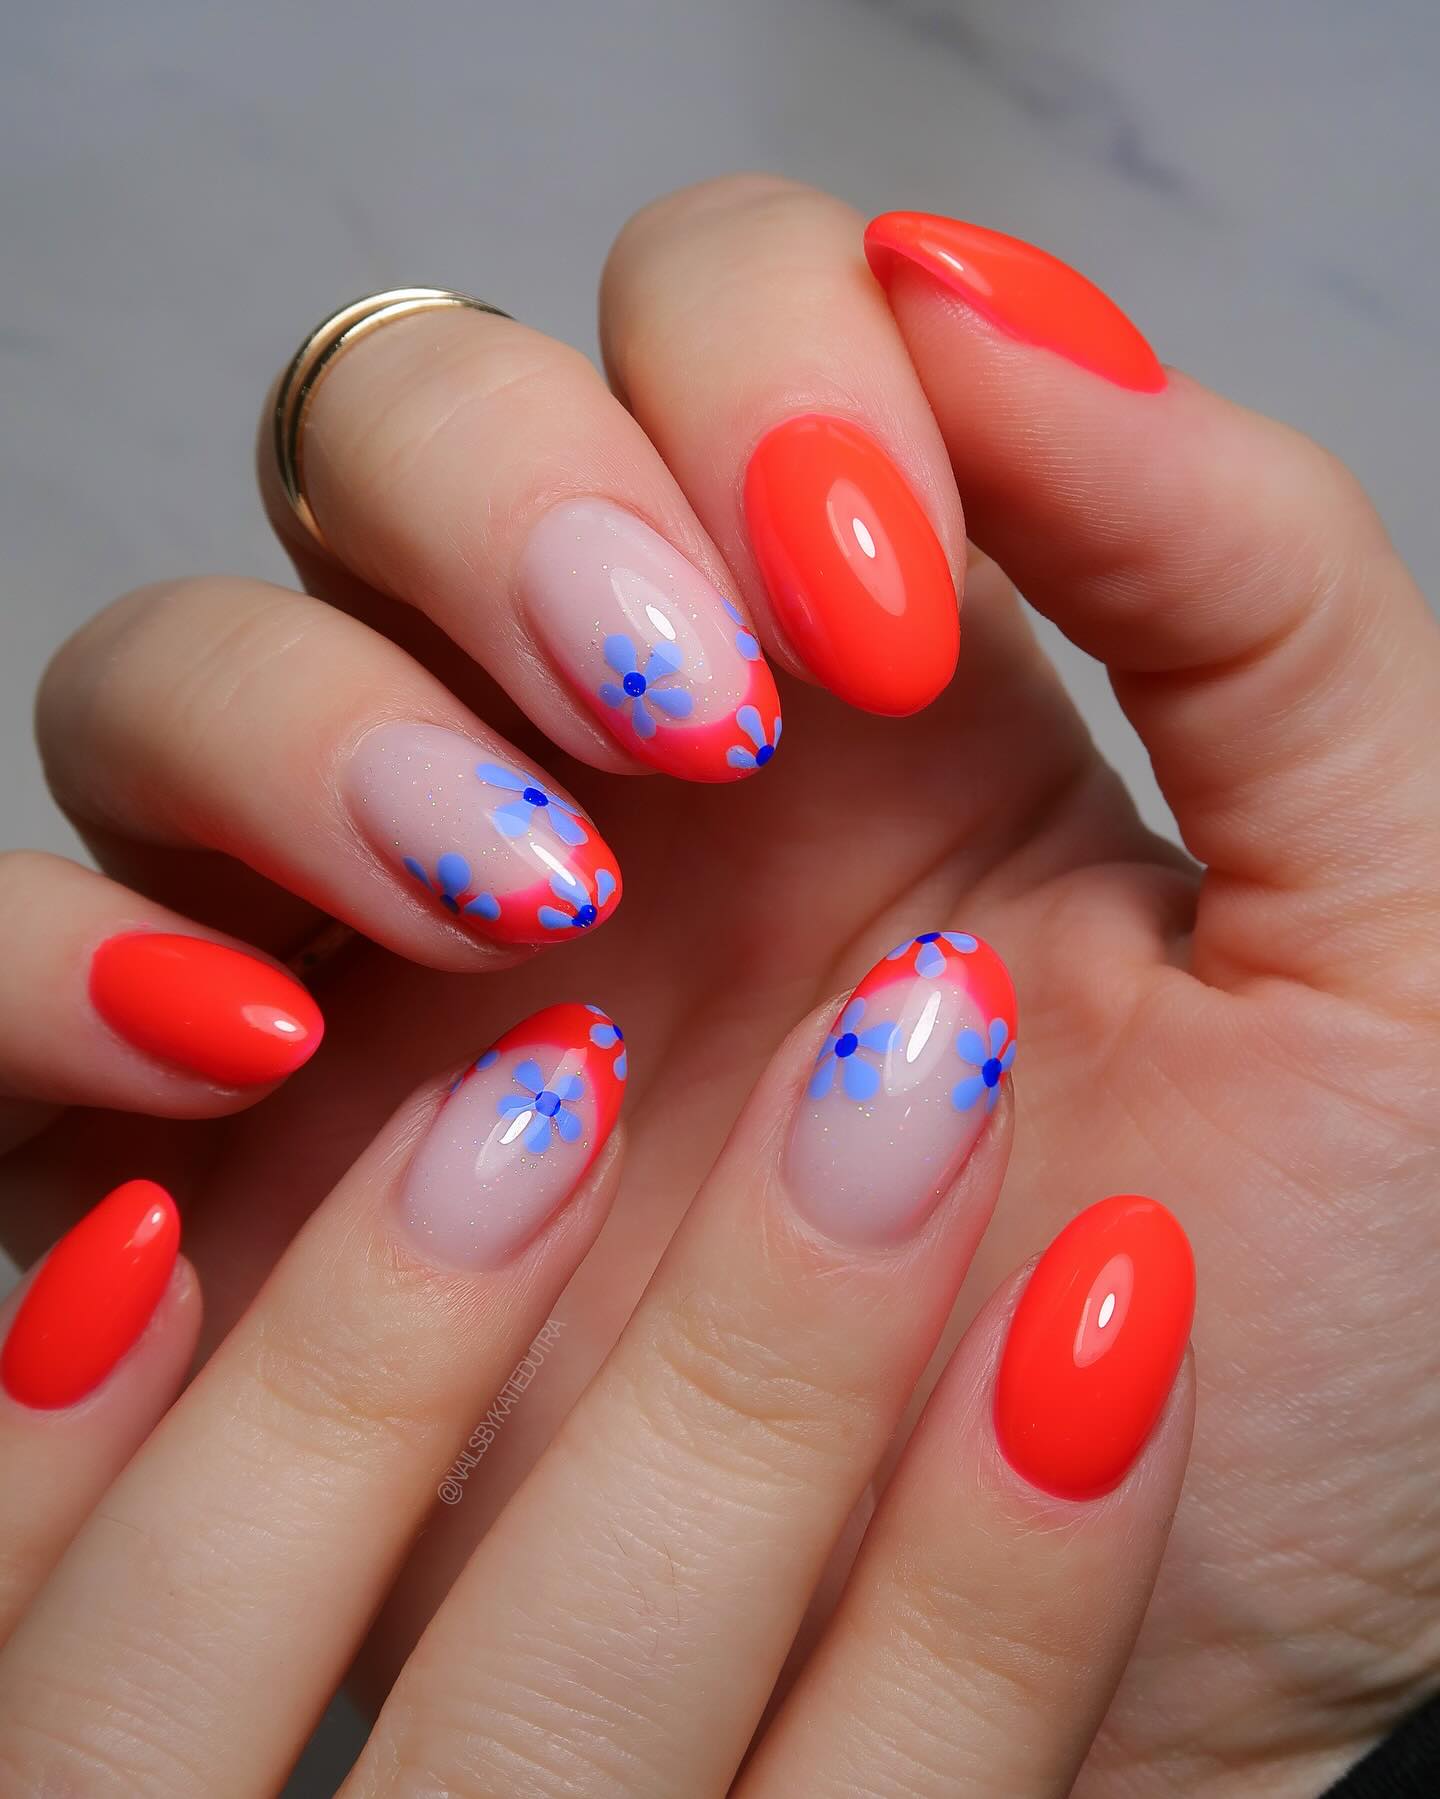 100+ Short Nail Designs You’ll Want To Try This Year images 57